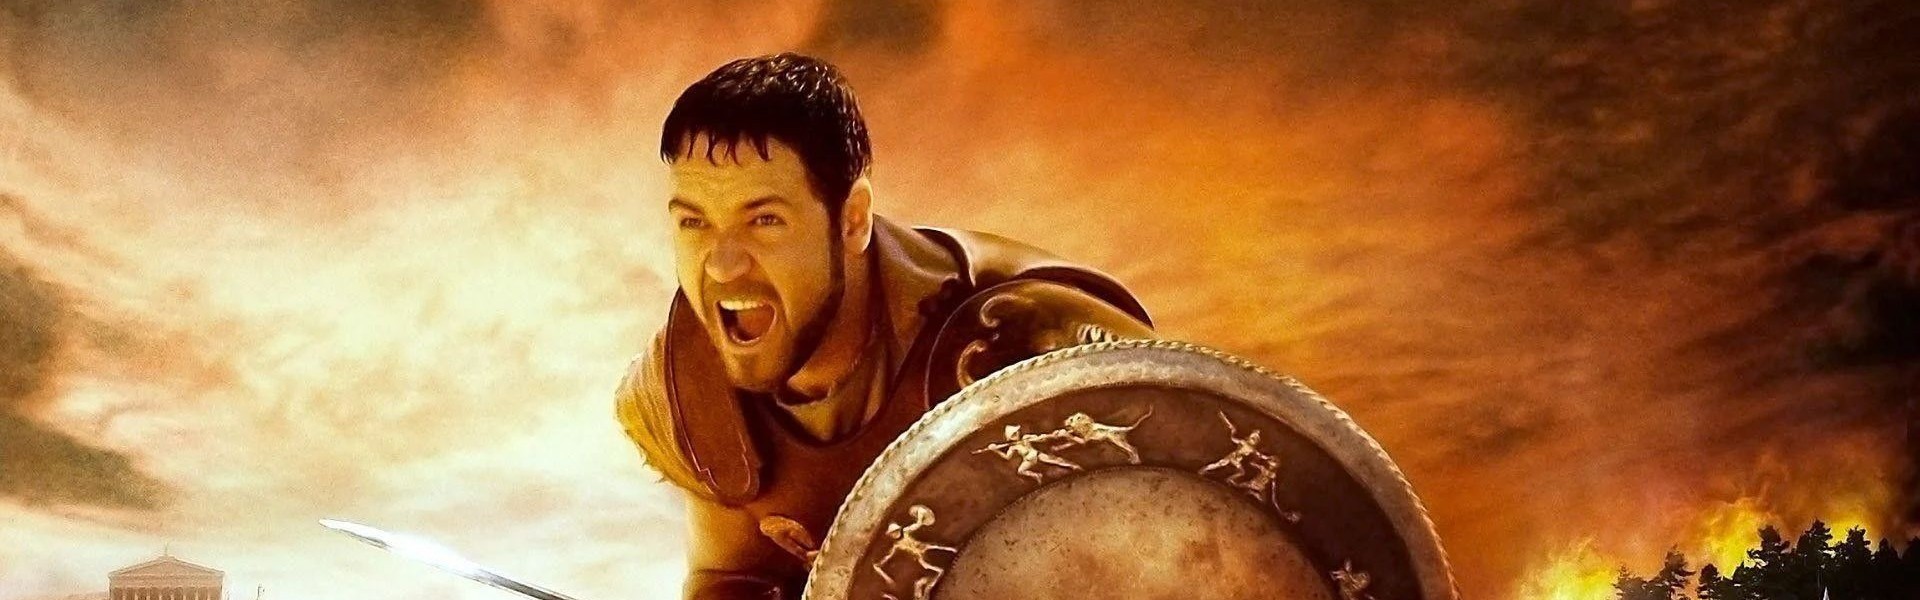 Gladiator vs. Baboon Gang: Ridley Scott’s Upcoming Spectacle